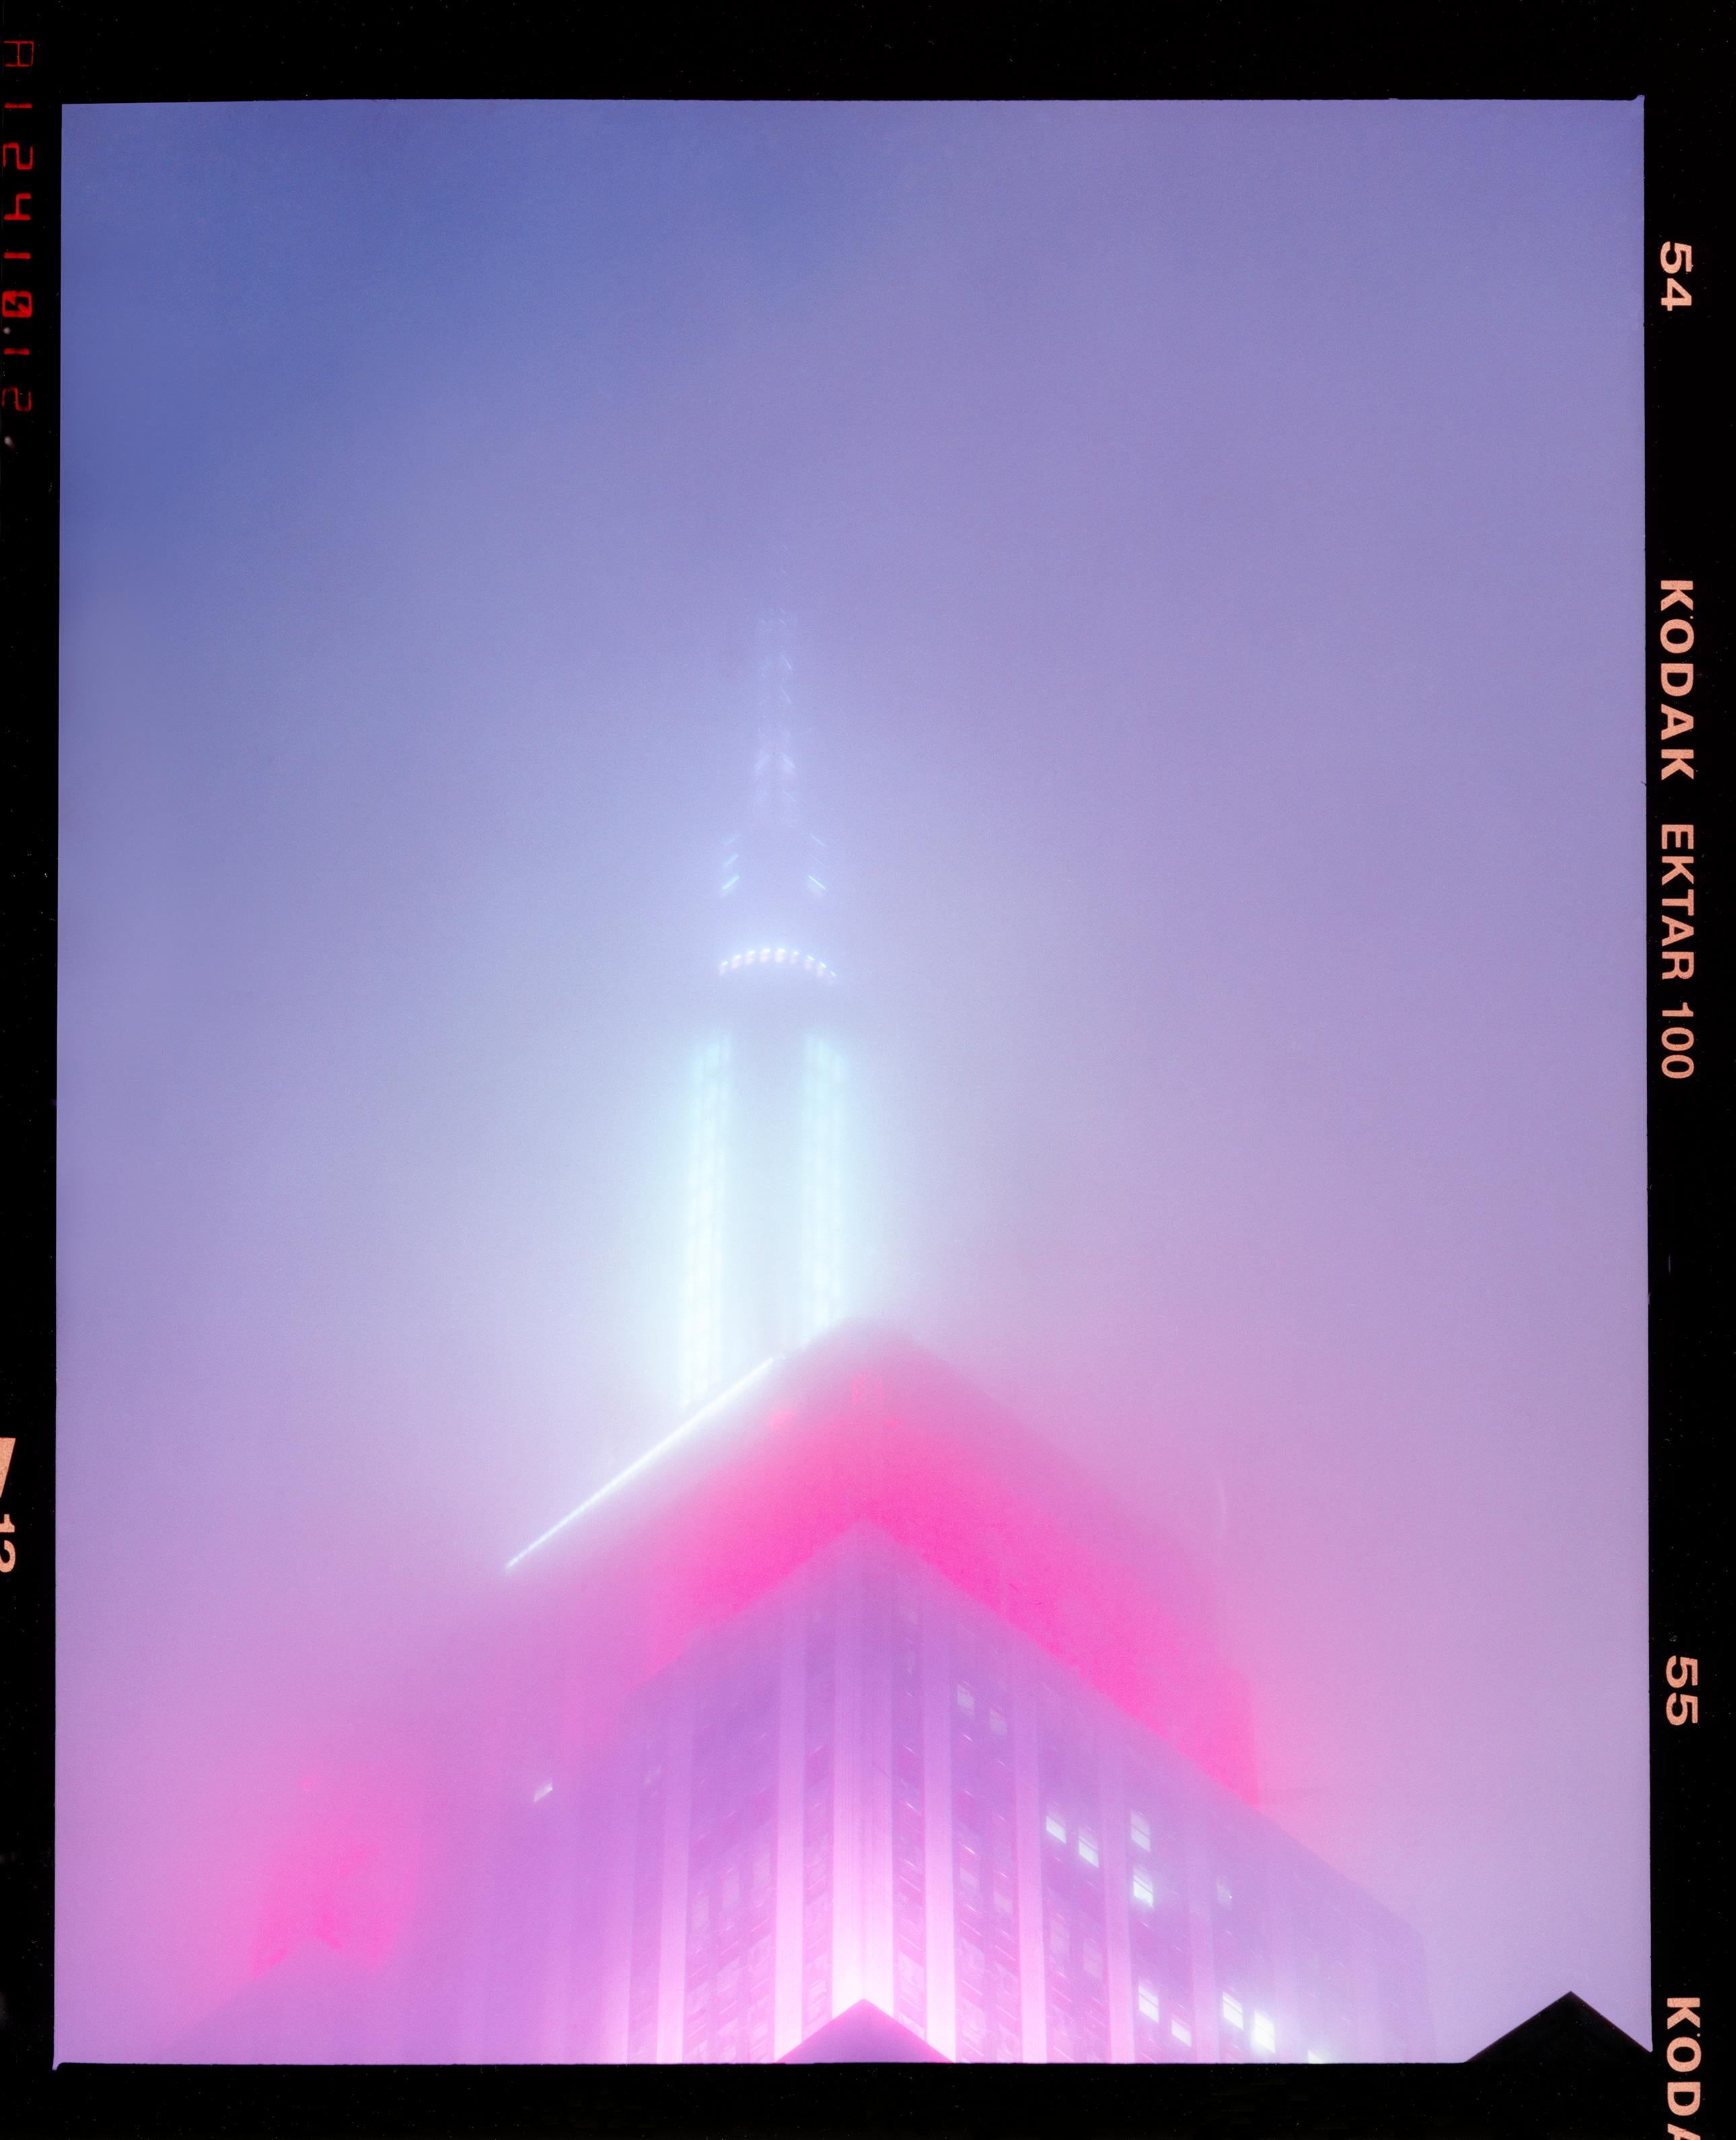 Richard Heeps Print - NOMAD IV (Film Rebate), New York - Conceptual Architectural Color Photography